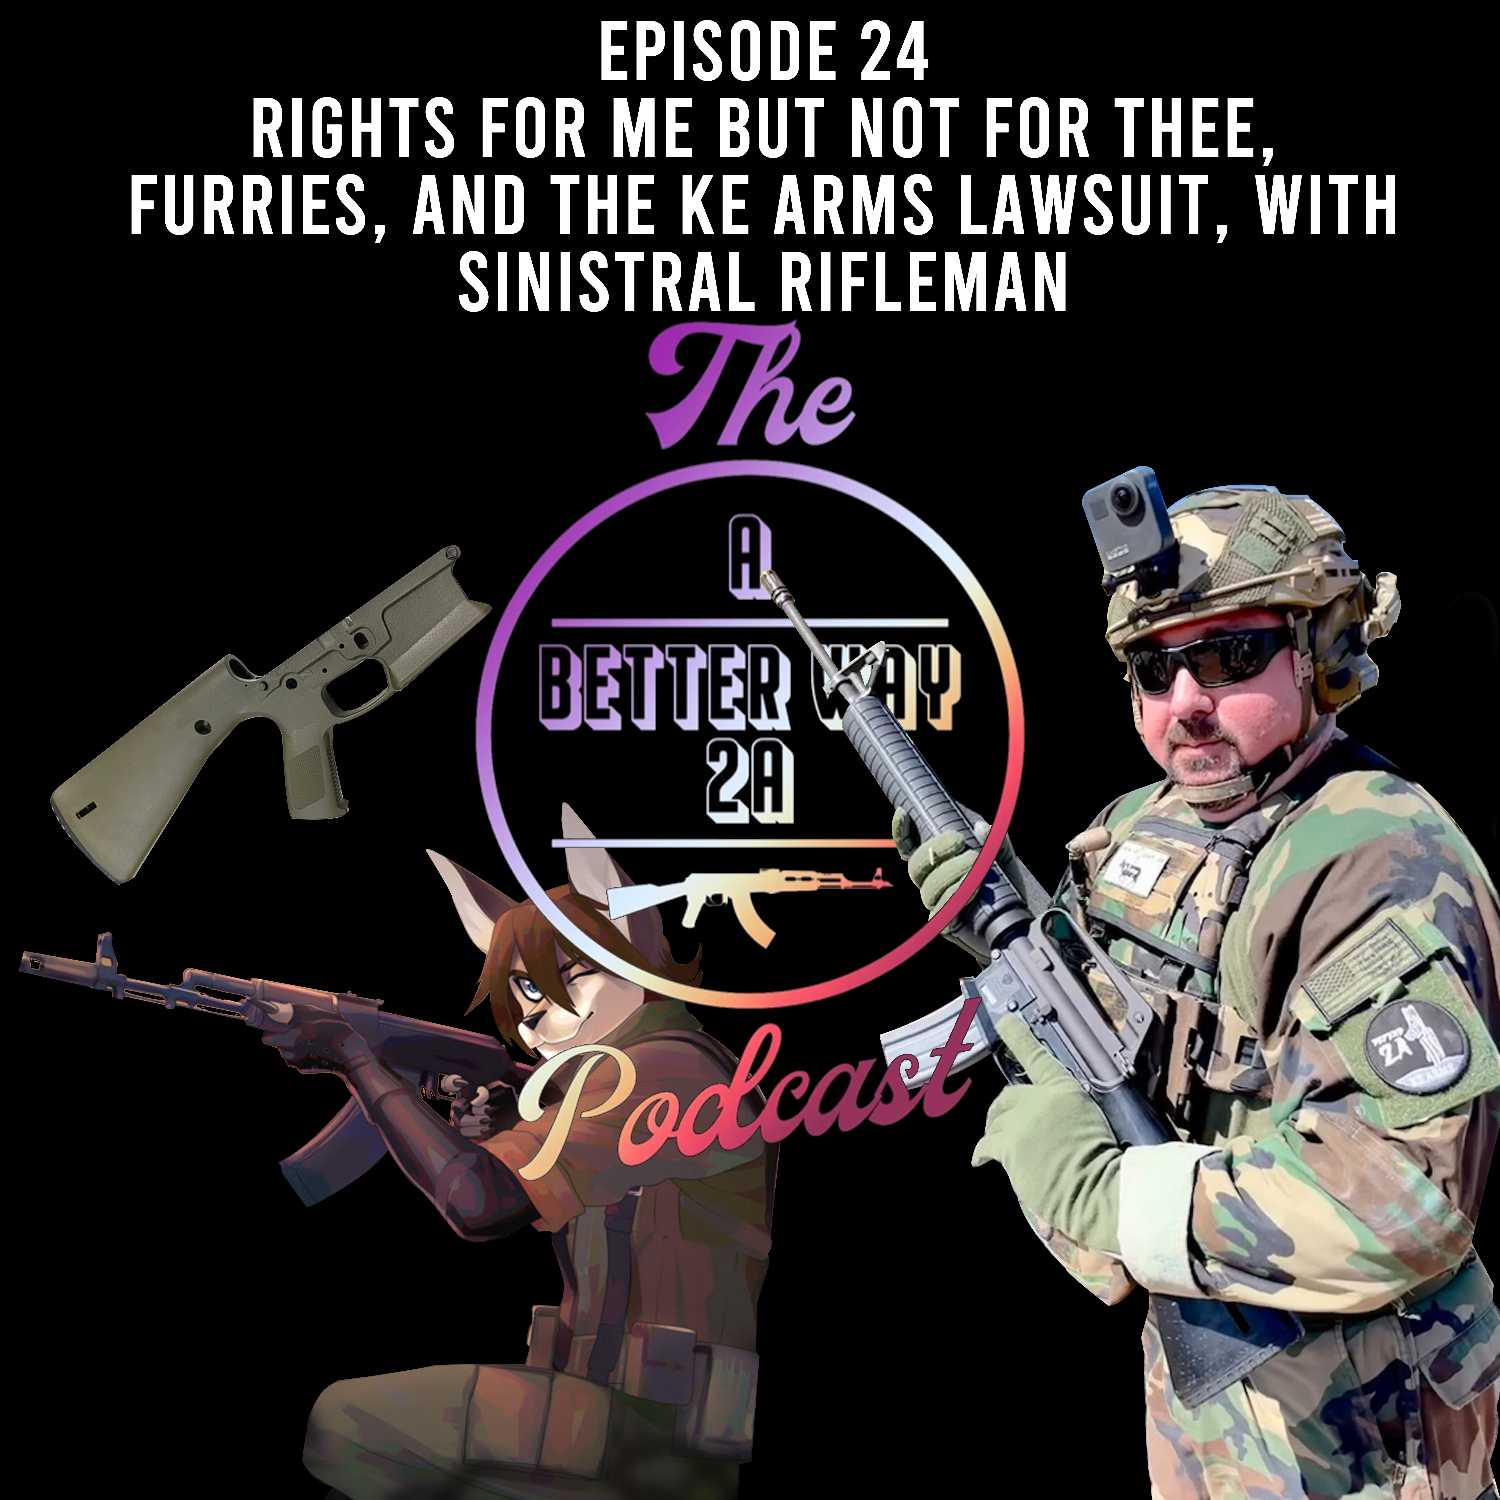 Episode 24 - Rights For Me But Not For Thee, Furries, and the KE Arms Lawsuit, with Sinistral Rifleman